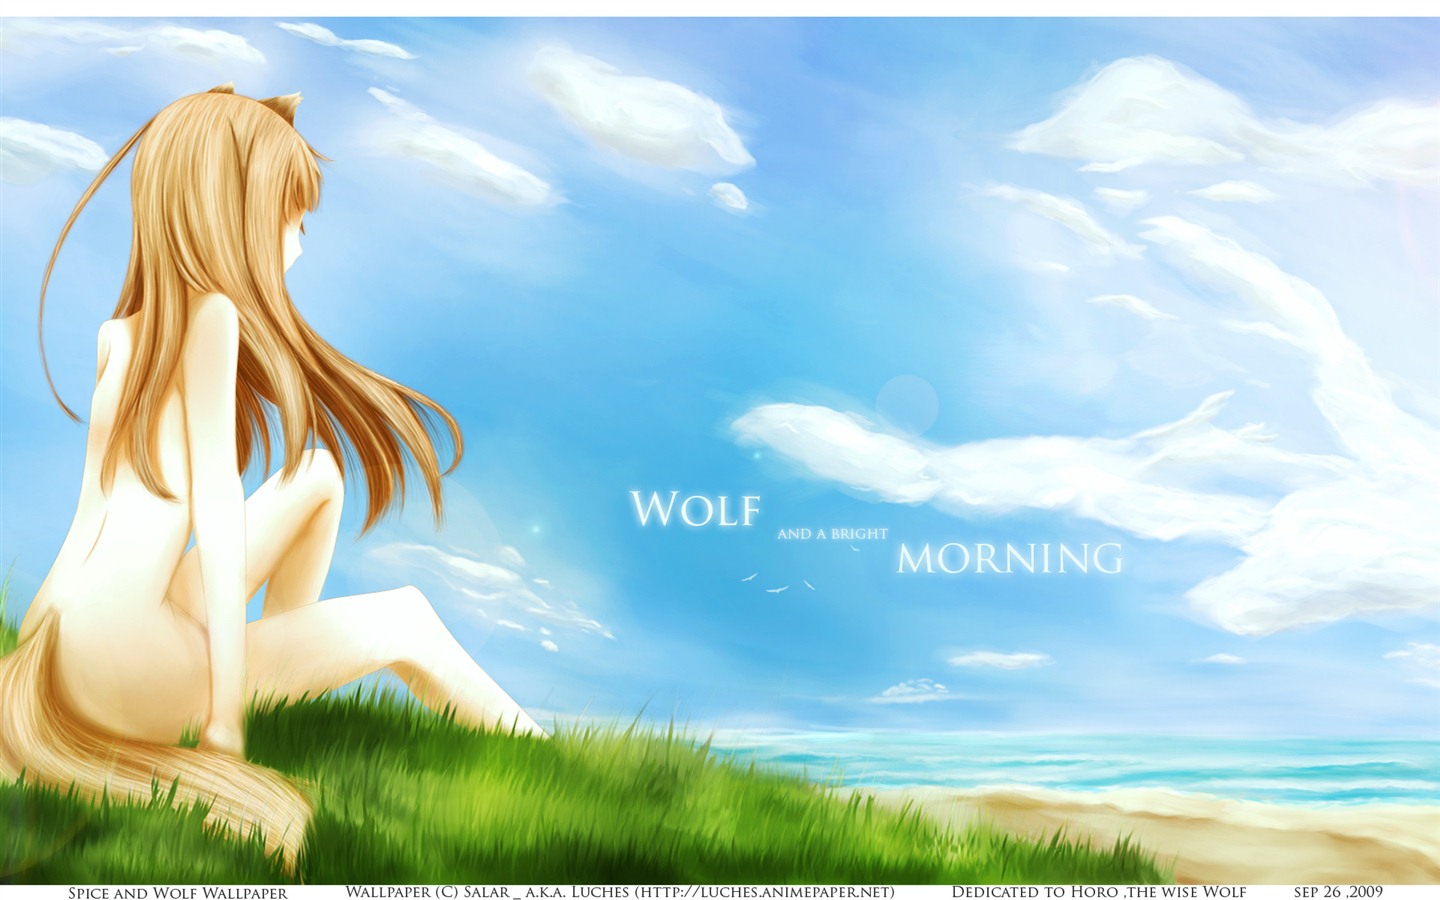 Spice and Wolf HD wallpapers #18 - 1440x900